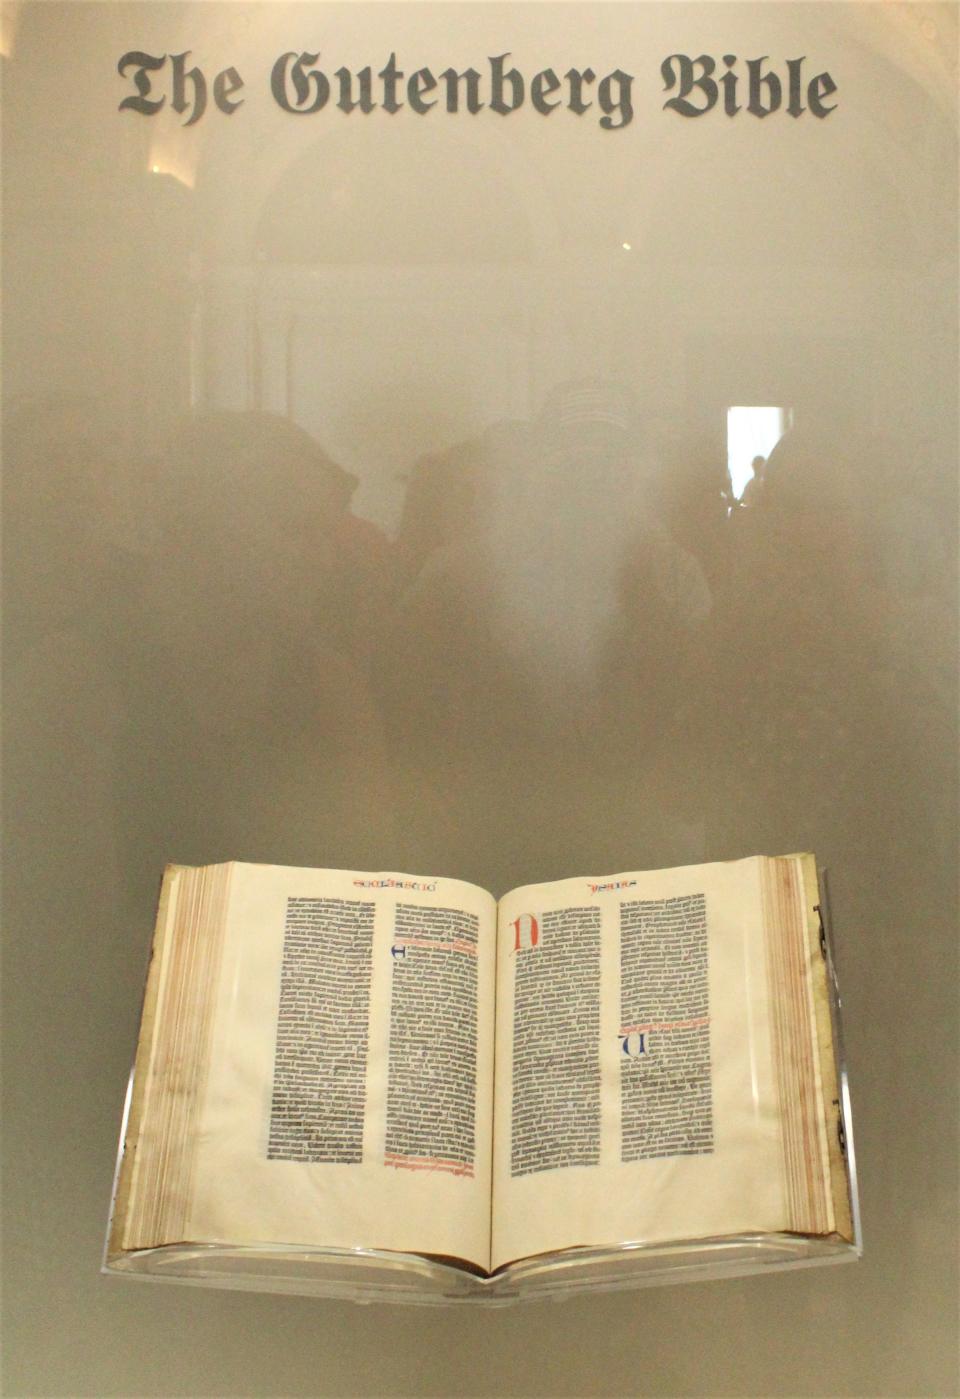 Gutenberg Bible is on display at the Library of Congress in Washington D.C.